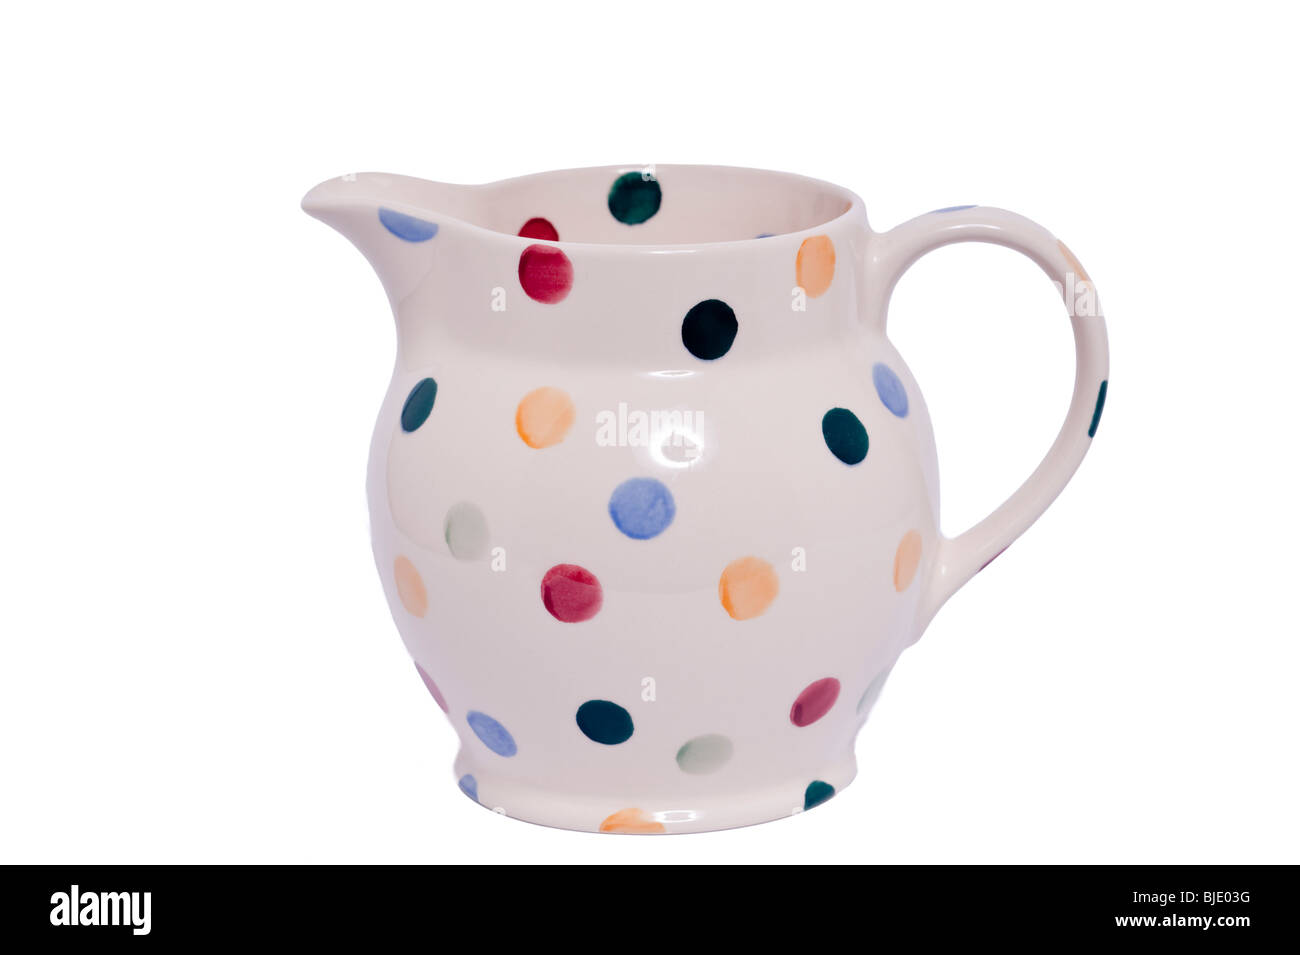 A Polka dot patterned jug by Emma Bridgewater decorated by hand on a white background Stock Photo